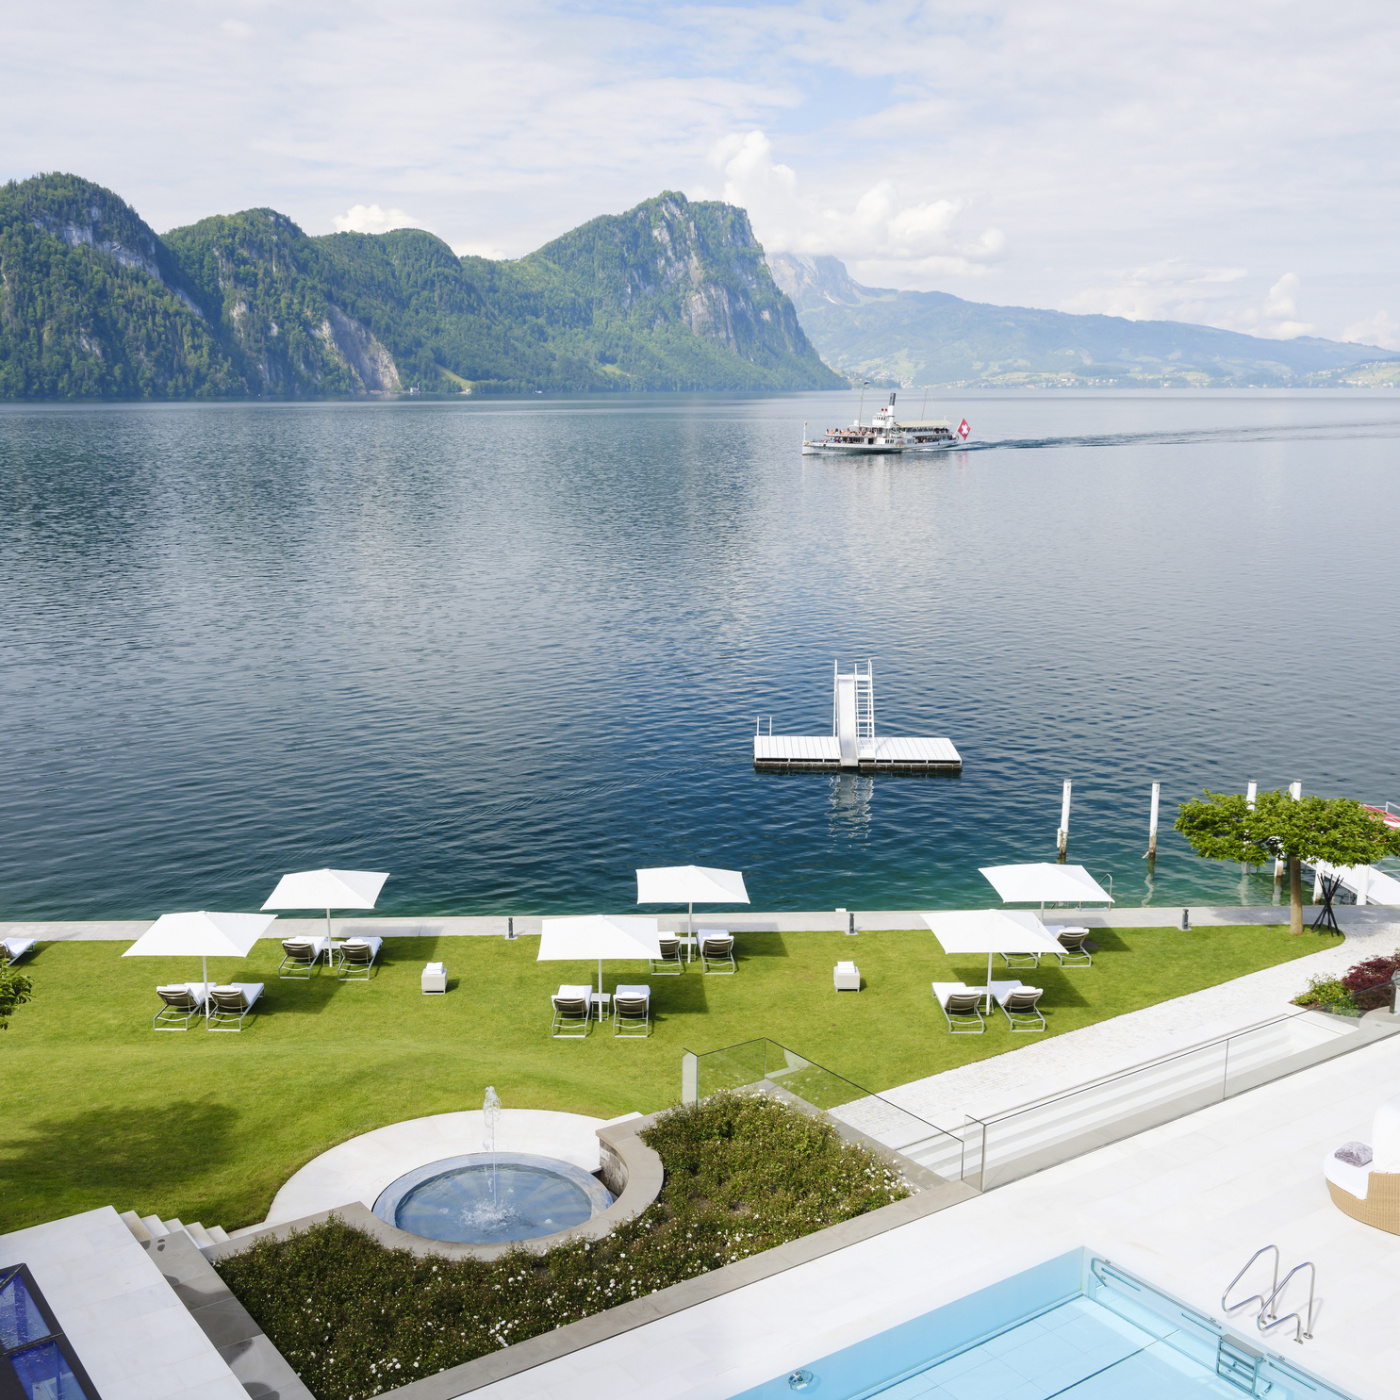 Pool and water view at luxury wedding venue on Lake Lucerne